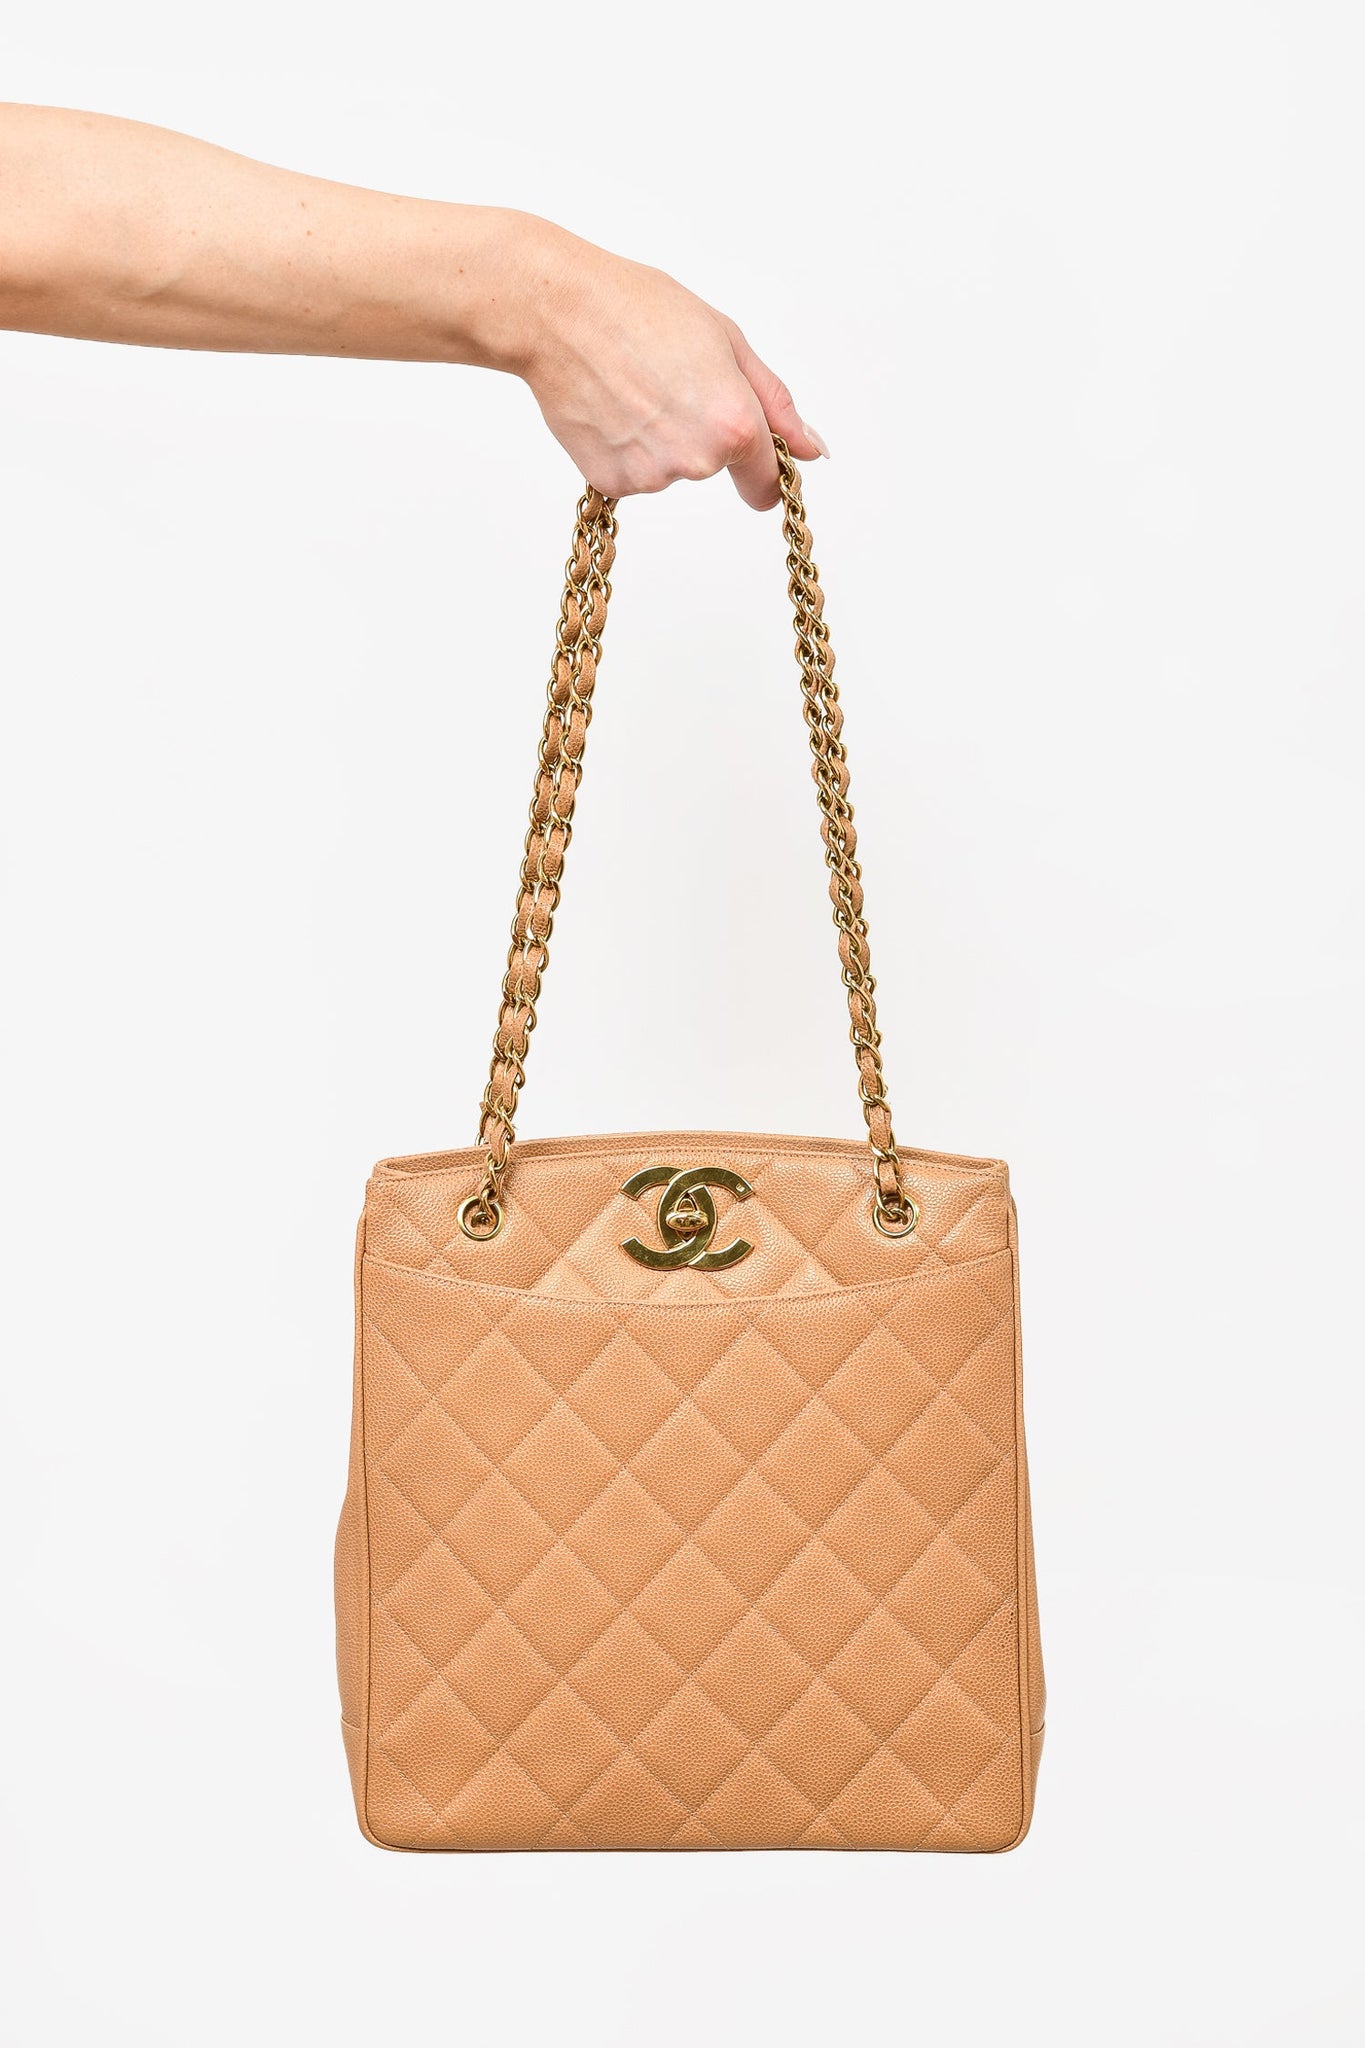 Chanel Timeless CC Red Shoulder Bag in Quilted Caviar  Vintage by Misty